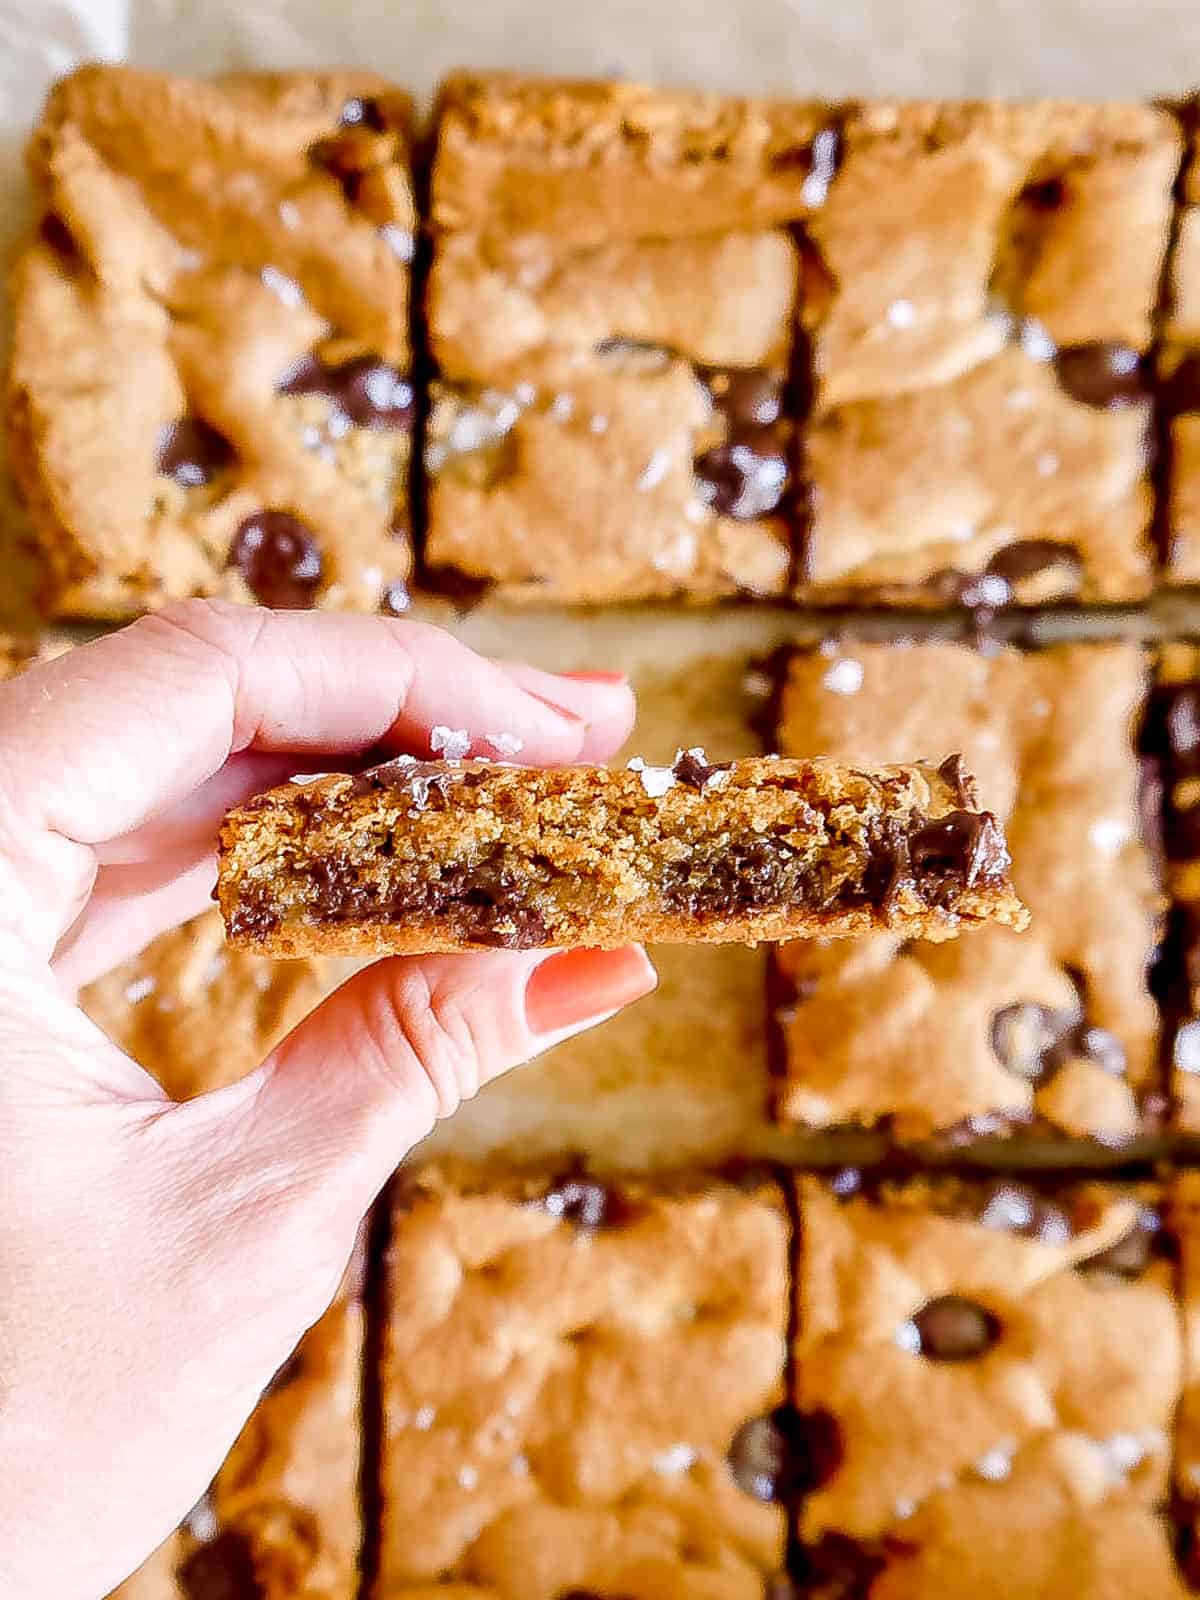 Gluten-free chocolate chip cookie bars in hand about to be bitten.